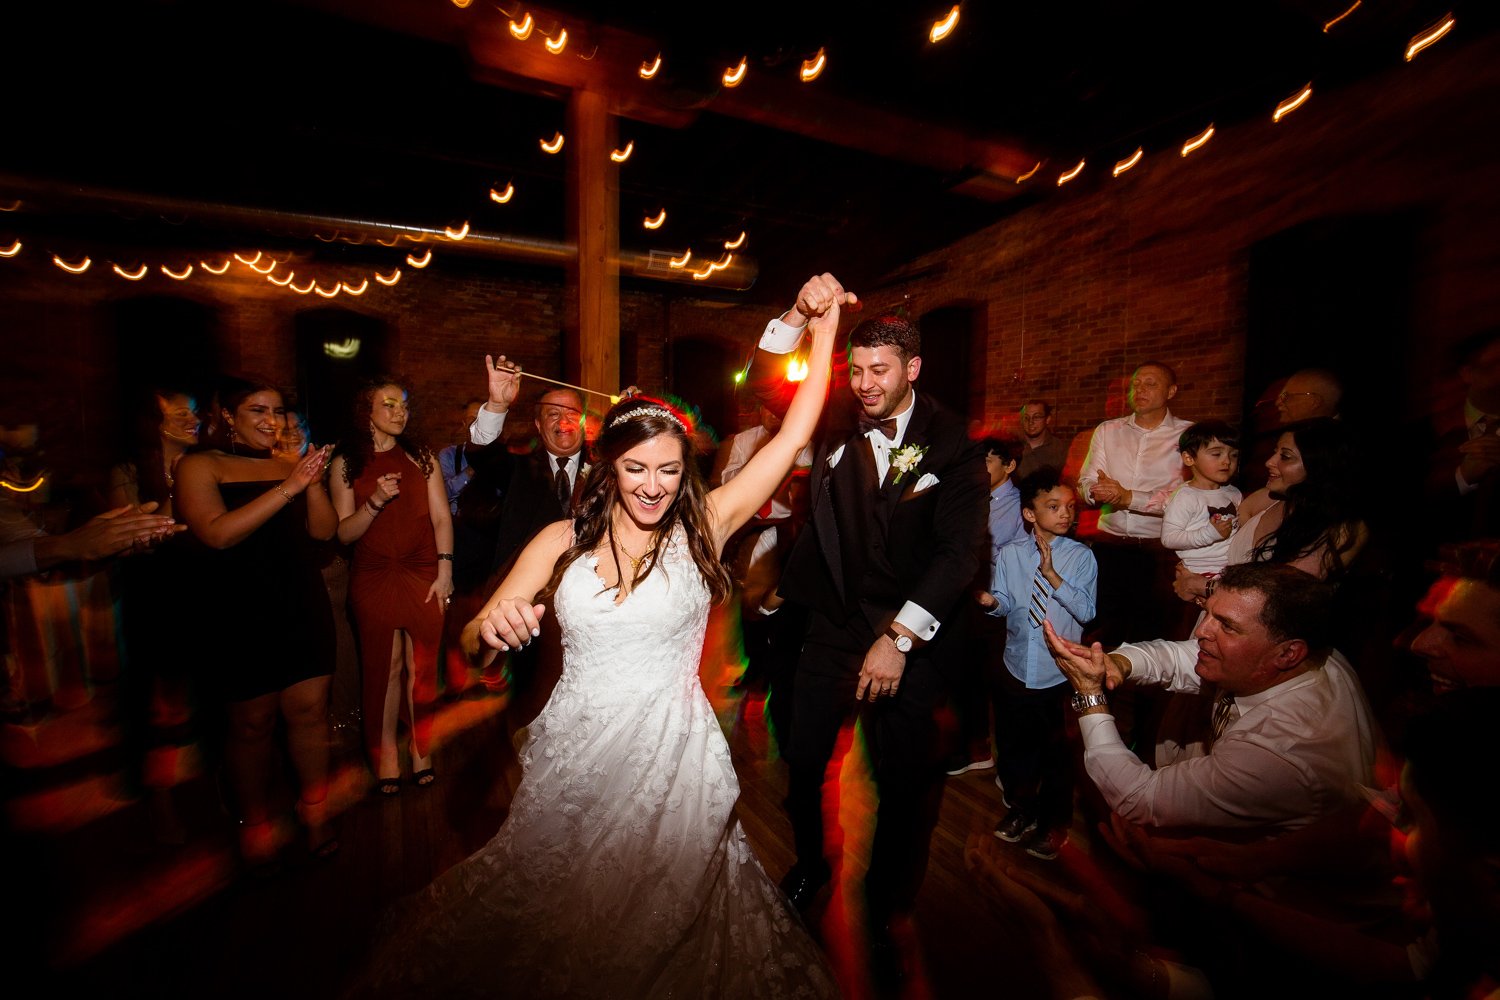 Bride and groom dancing Wedding Reception fun at Trailside Event Center Wedding in Peoria Illinois